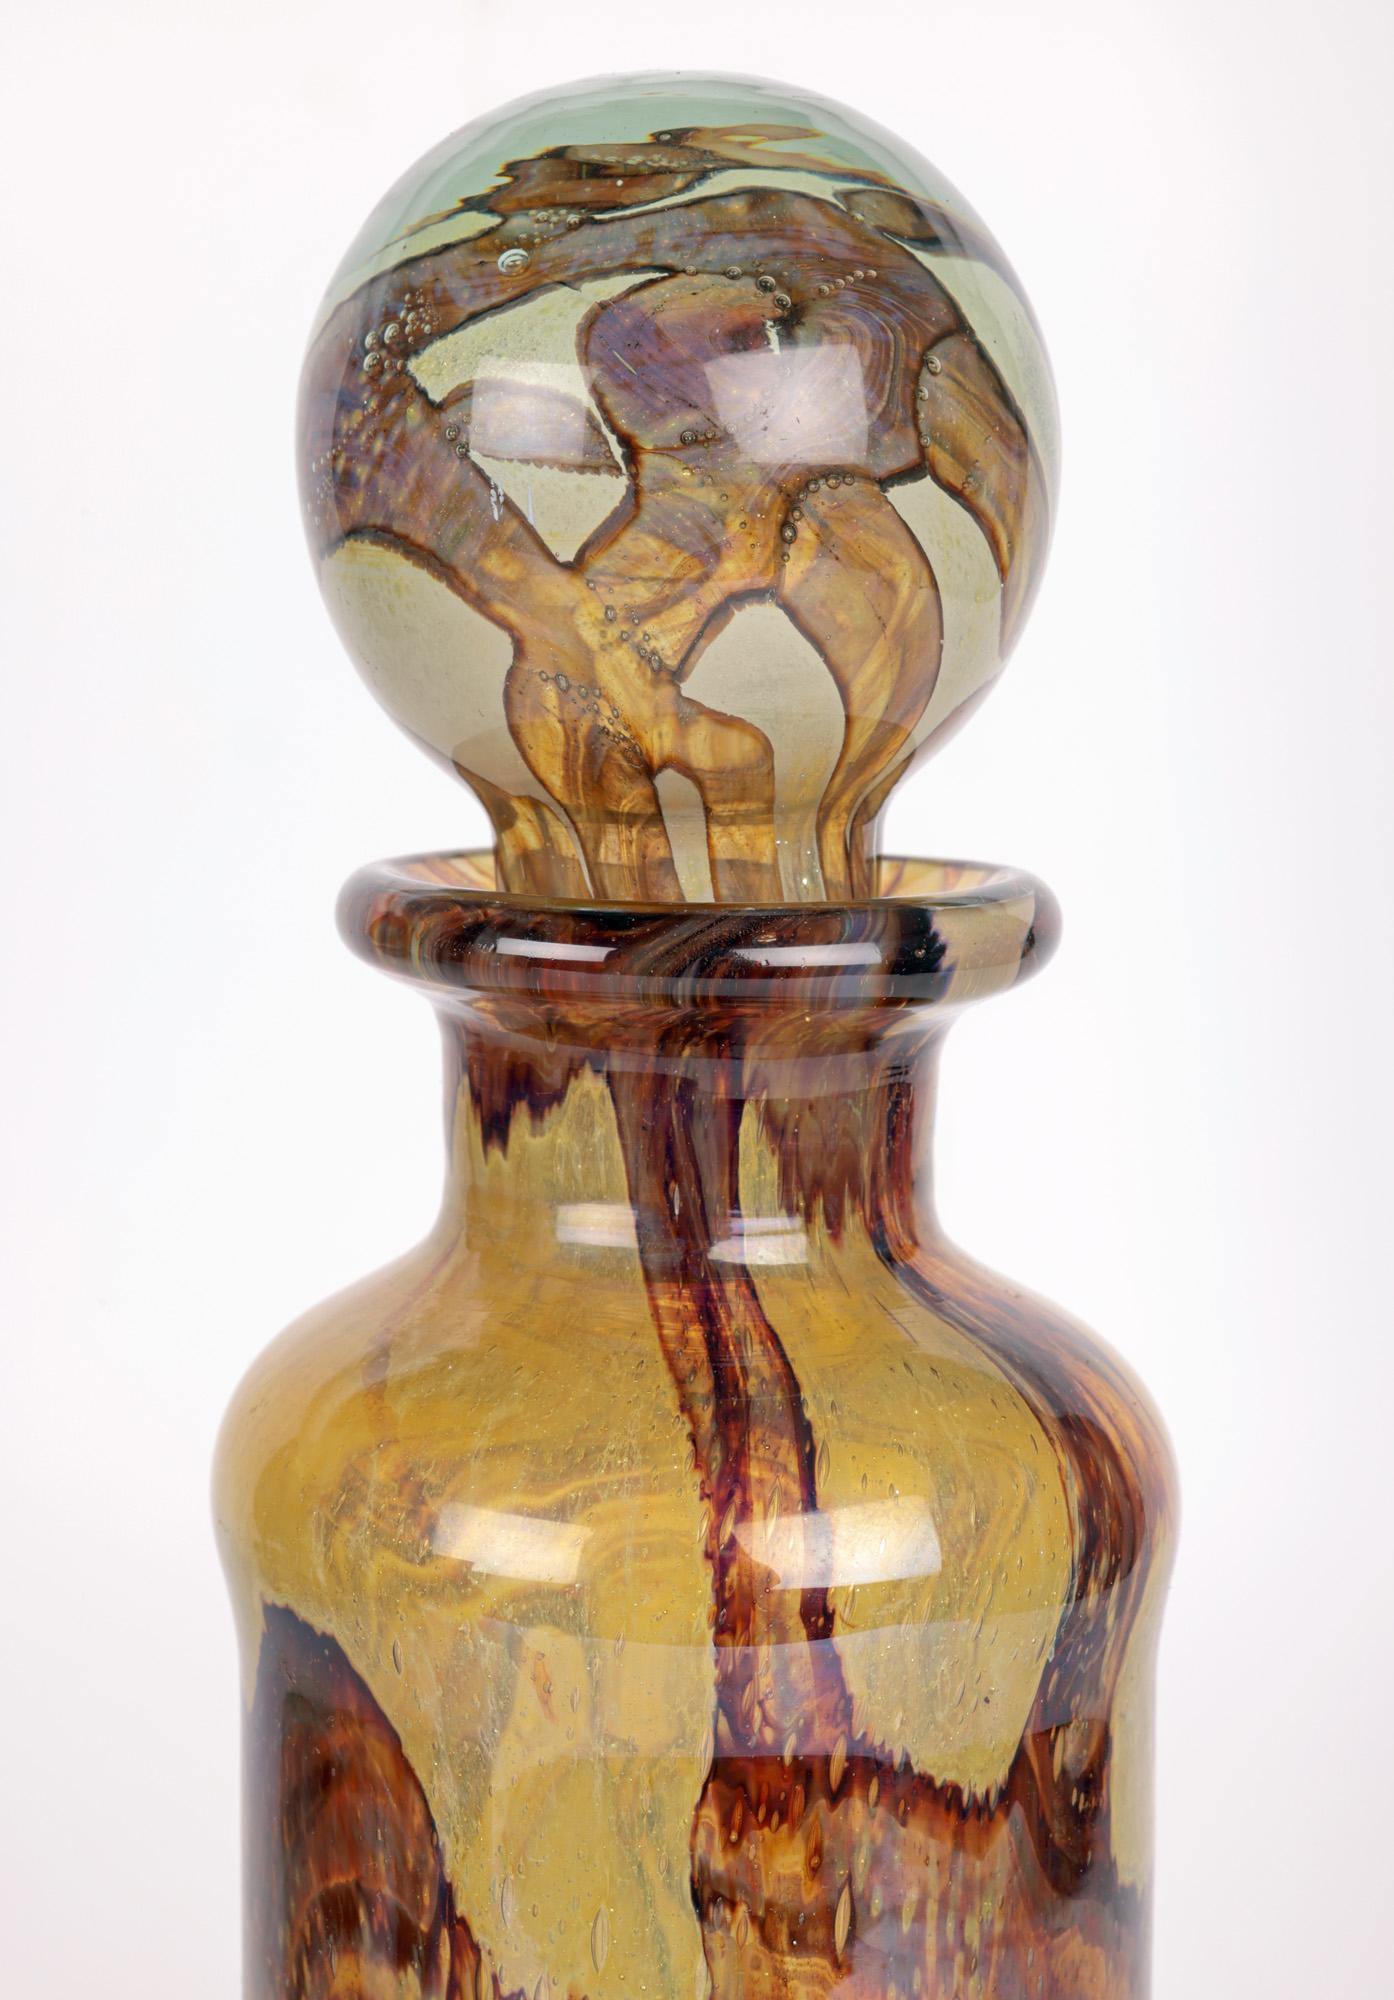 A tall and exceptional Maltese art glass decanter and stopper with a brown abstract swirl design made at Mdina and designed by Michael Harris in the early 1970’s. The hand-blown glass decanter is of tall cylindrical shape with a slight widening at